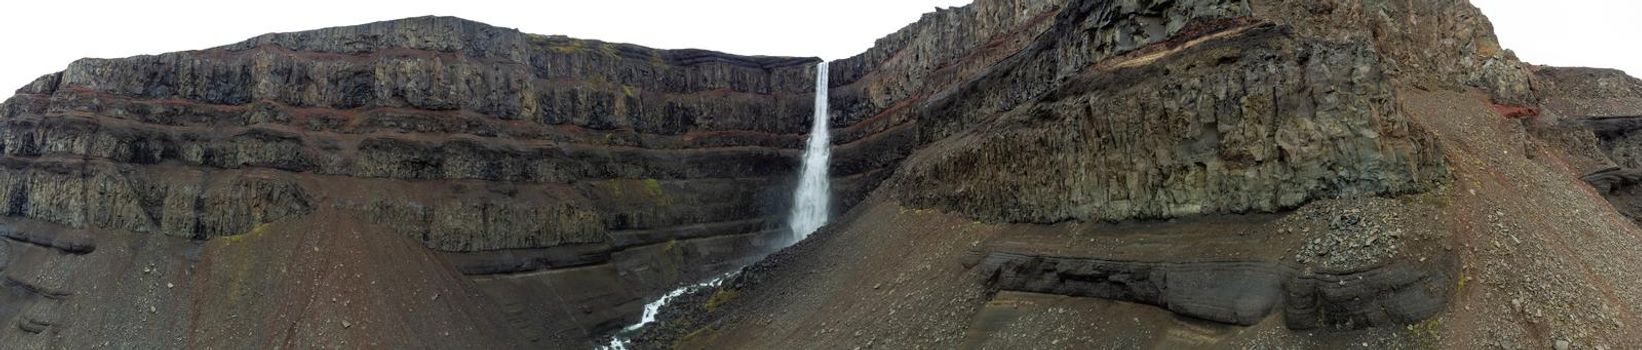 Famous Svartifoss waterfall wide panorama under cloudy sky in Iceland